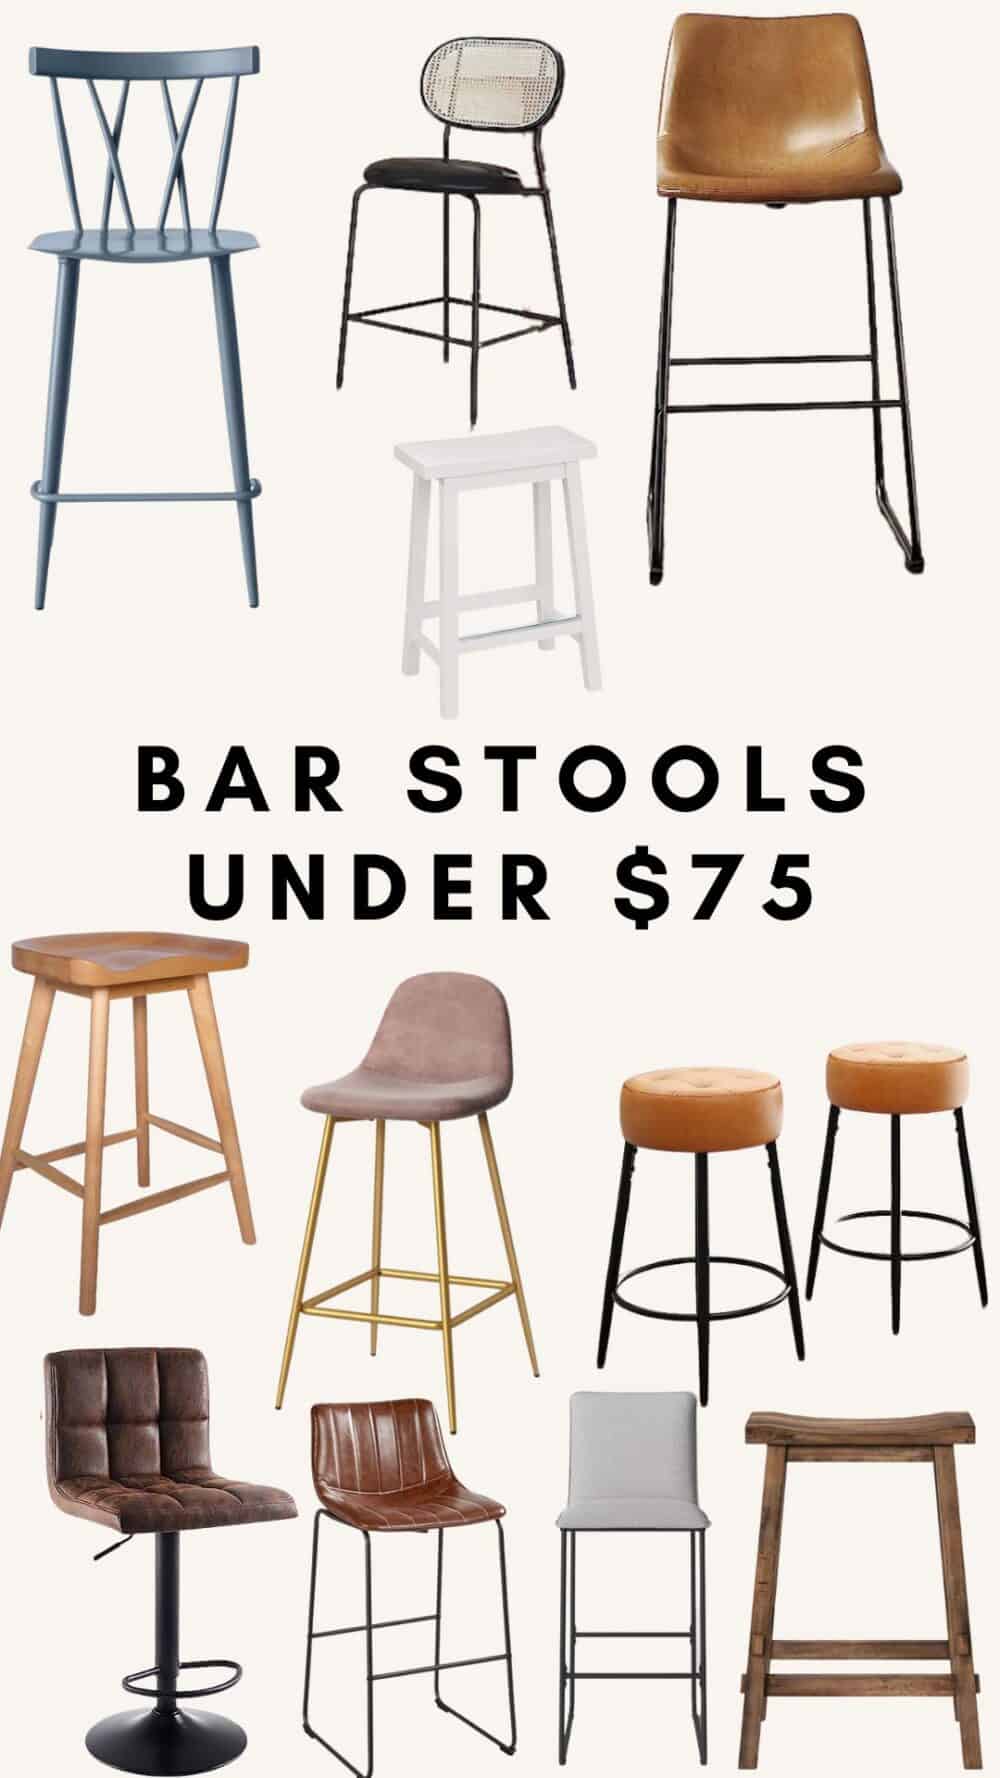 collage of bar stools under $75 